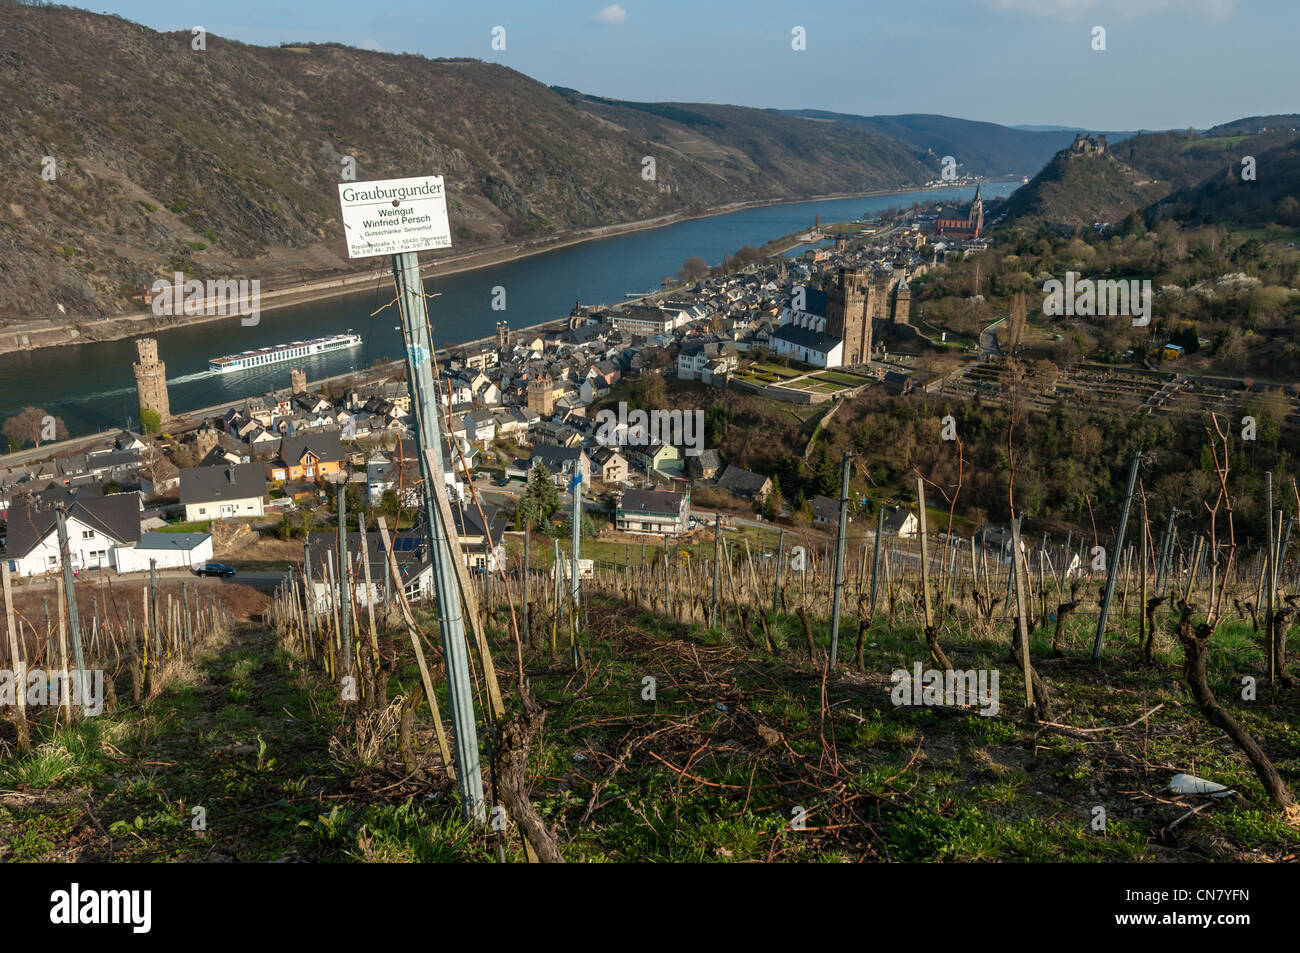 View of UNESCO listed 'Upper Middle Rhine Valley' from above Oberwesel, Rhineland Palatinate, Germany. Stock Photo